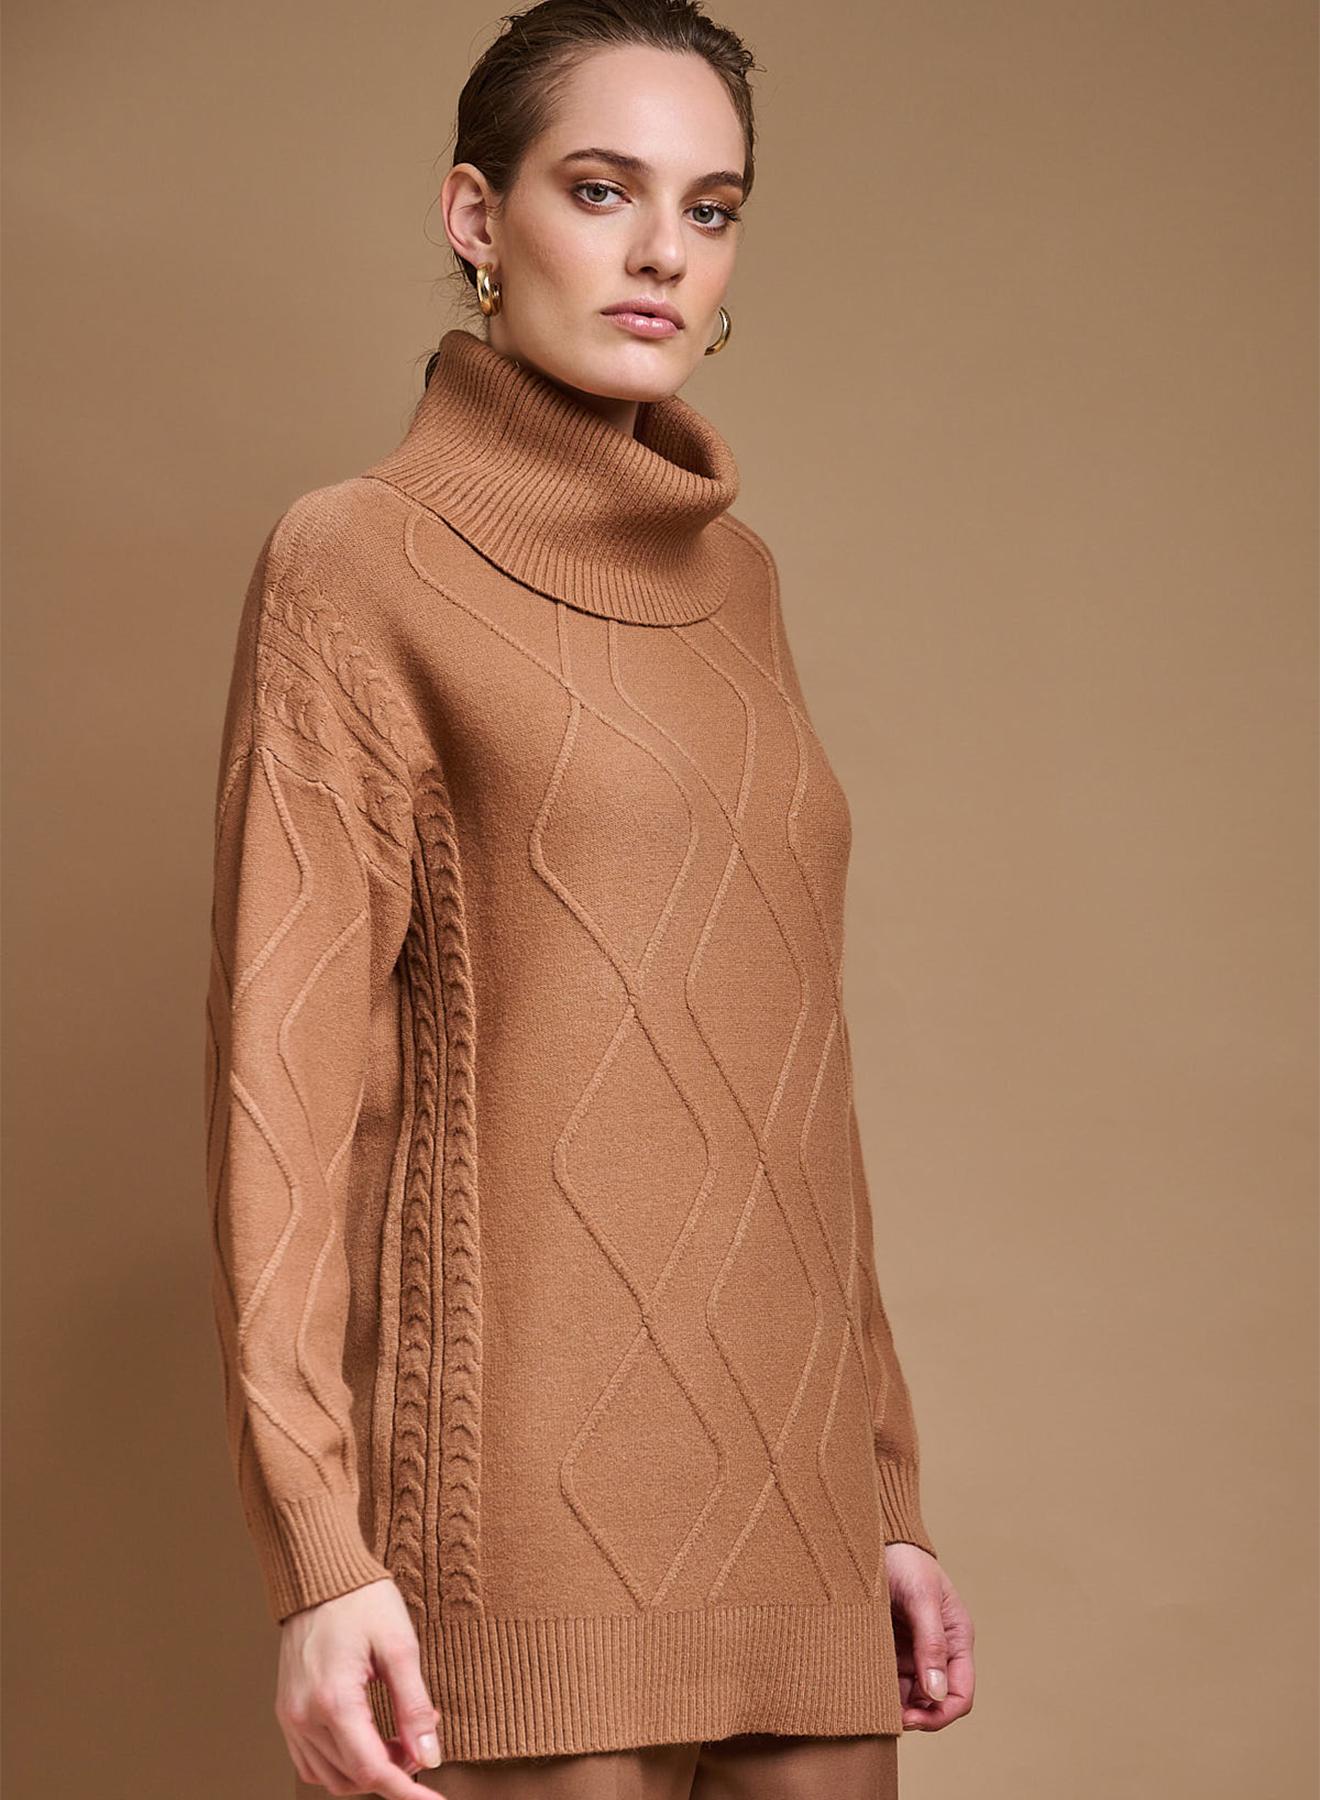 Turtleneck sweater with textured details - 1